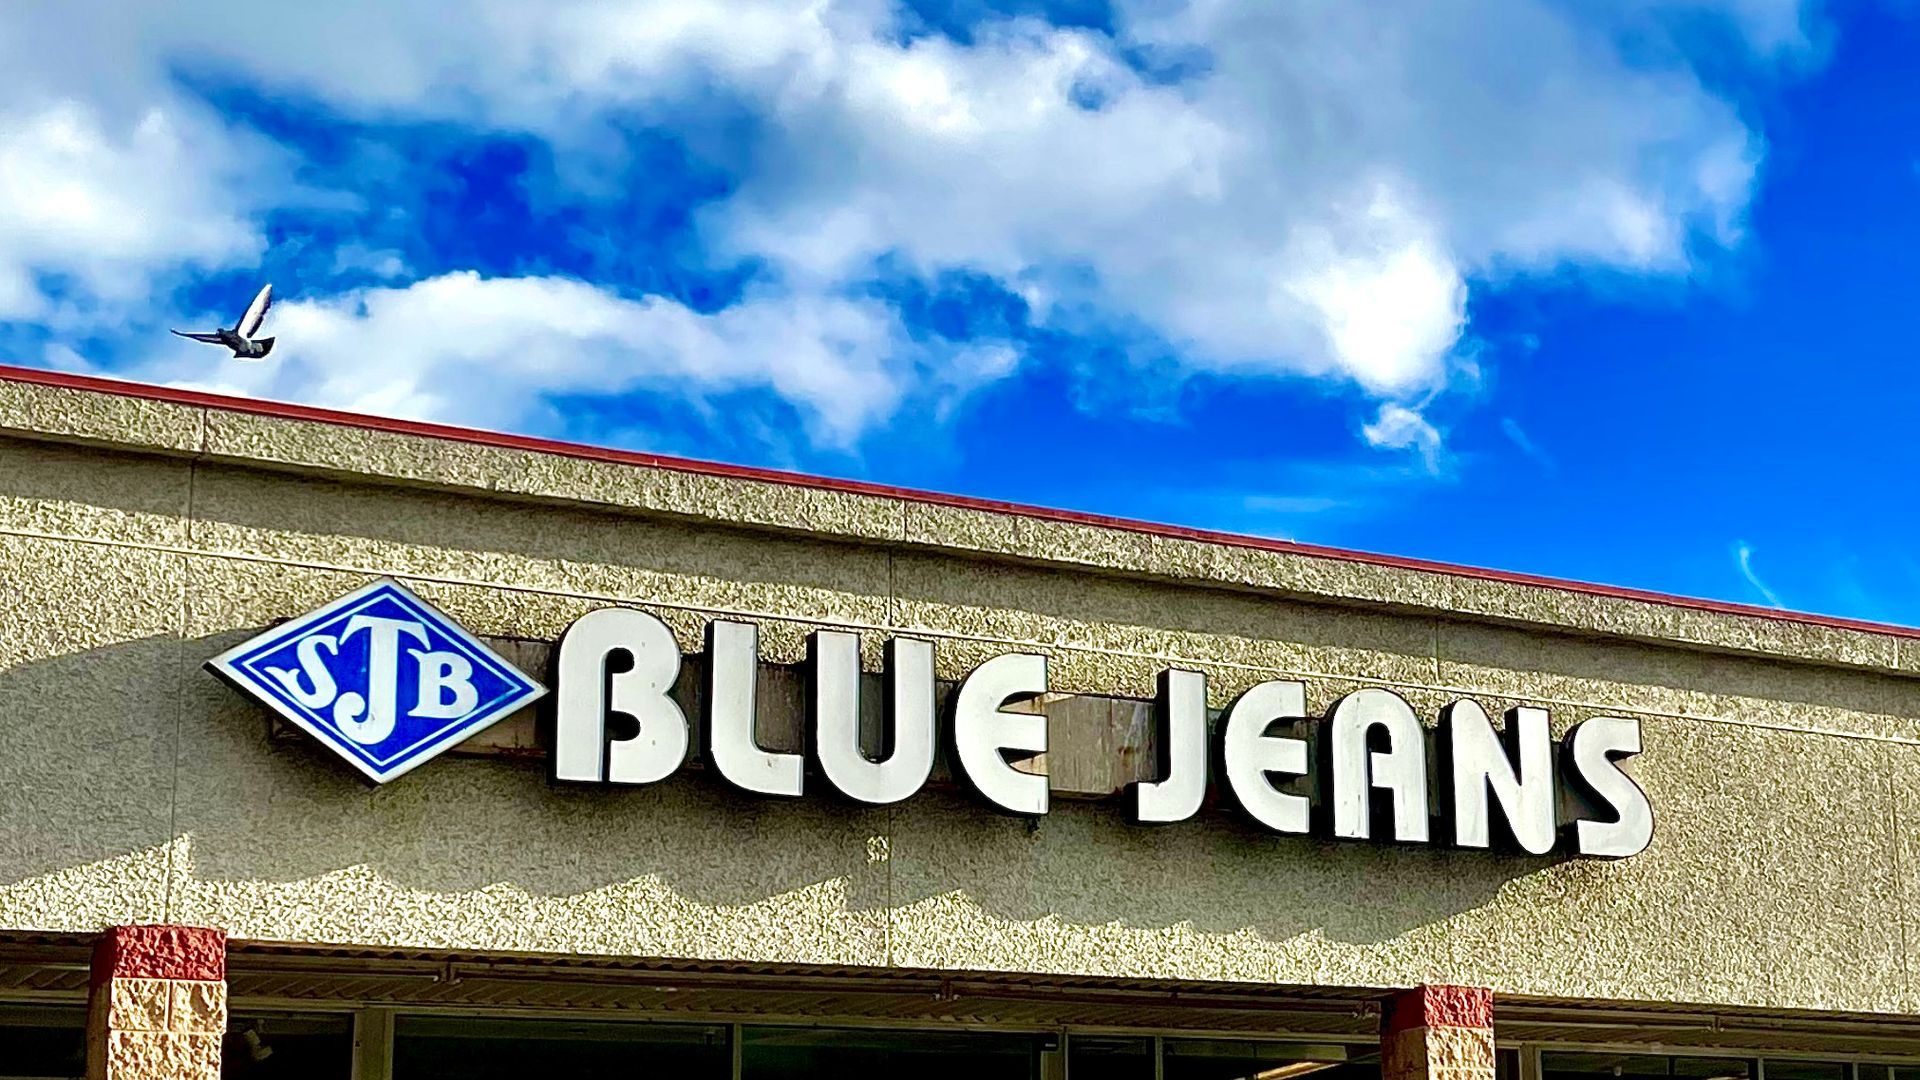 SJ Blue Jeans and Jeans Palace